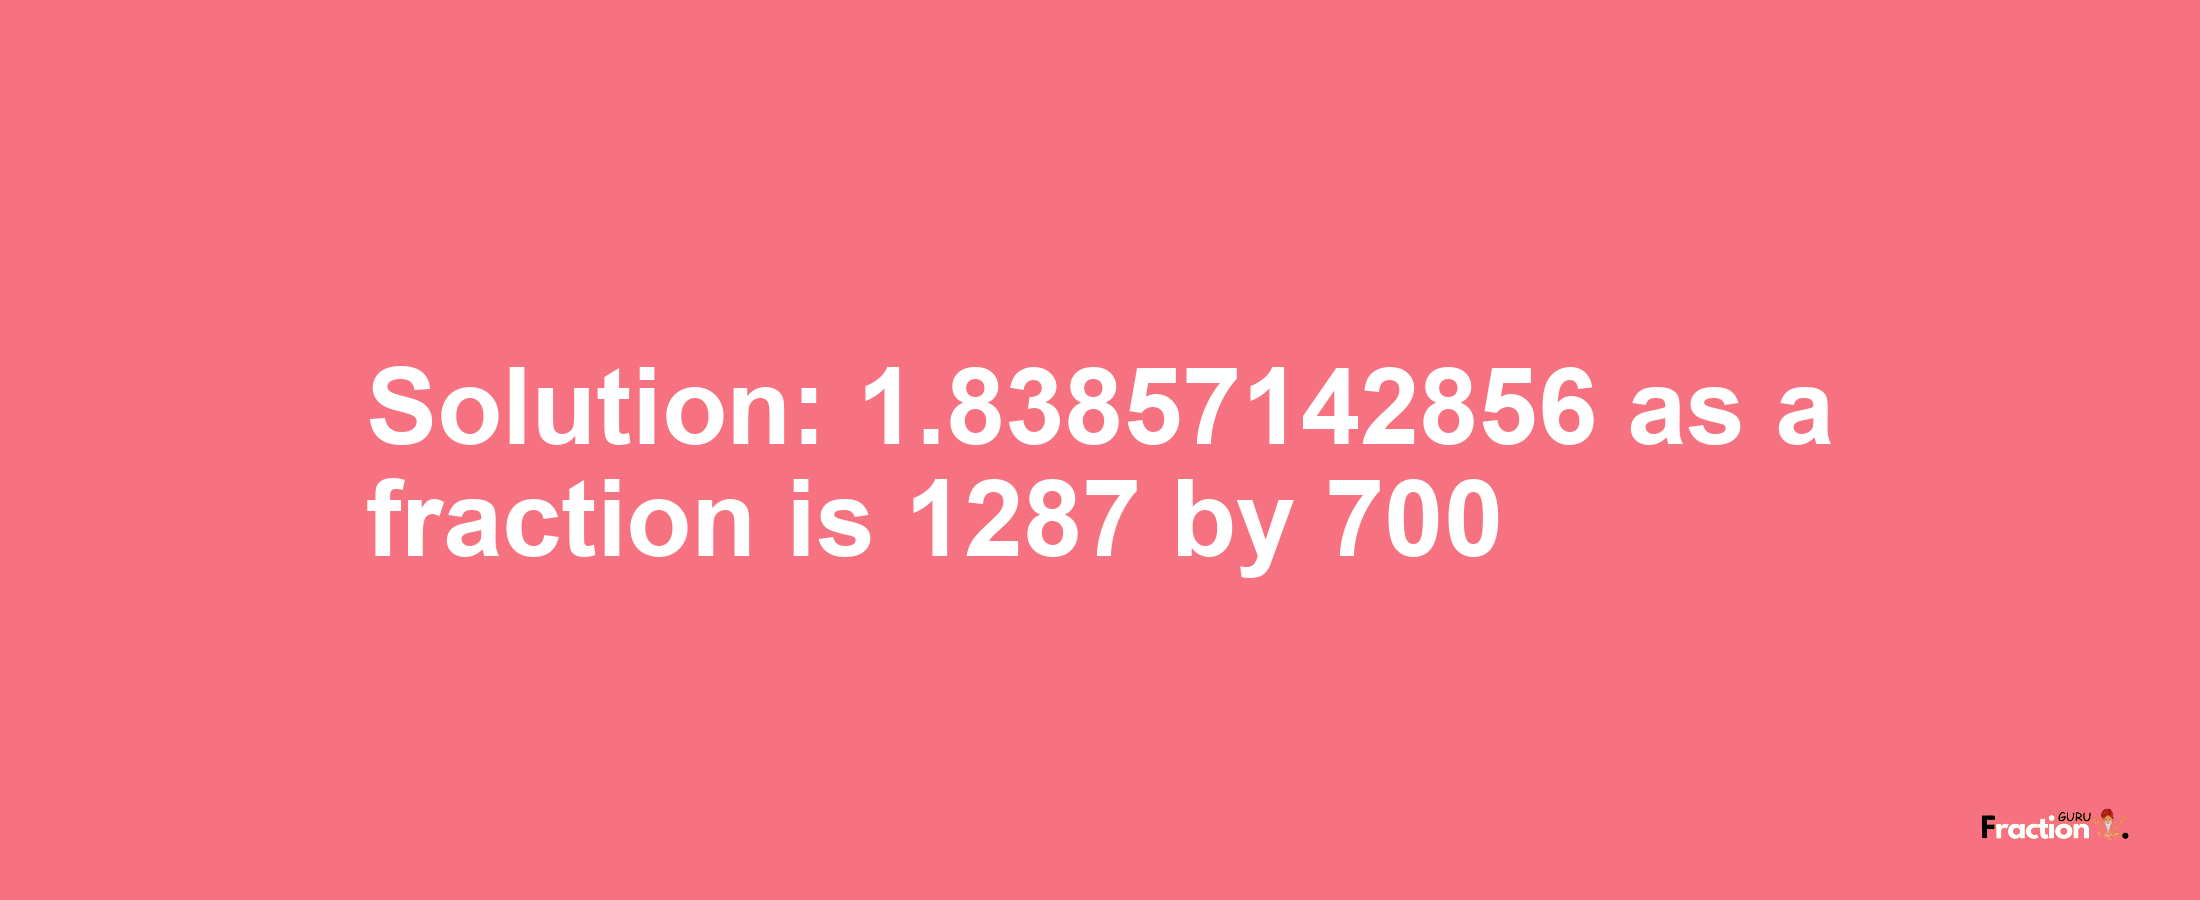 Solution:1.83857142856 as a fraction is 1287/700